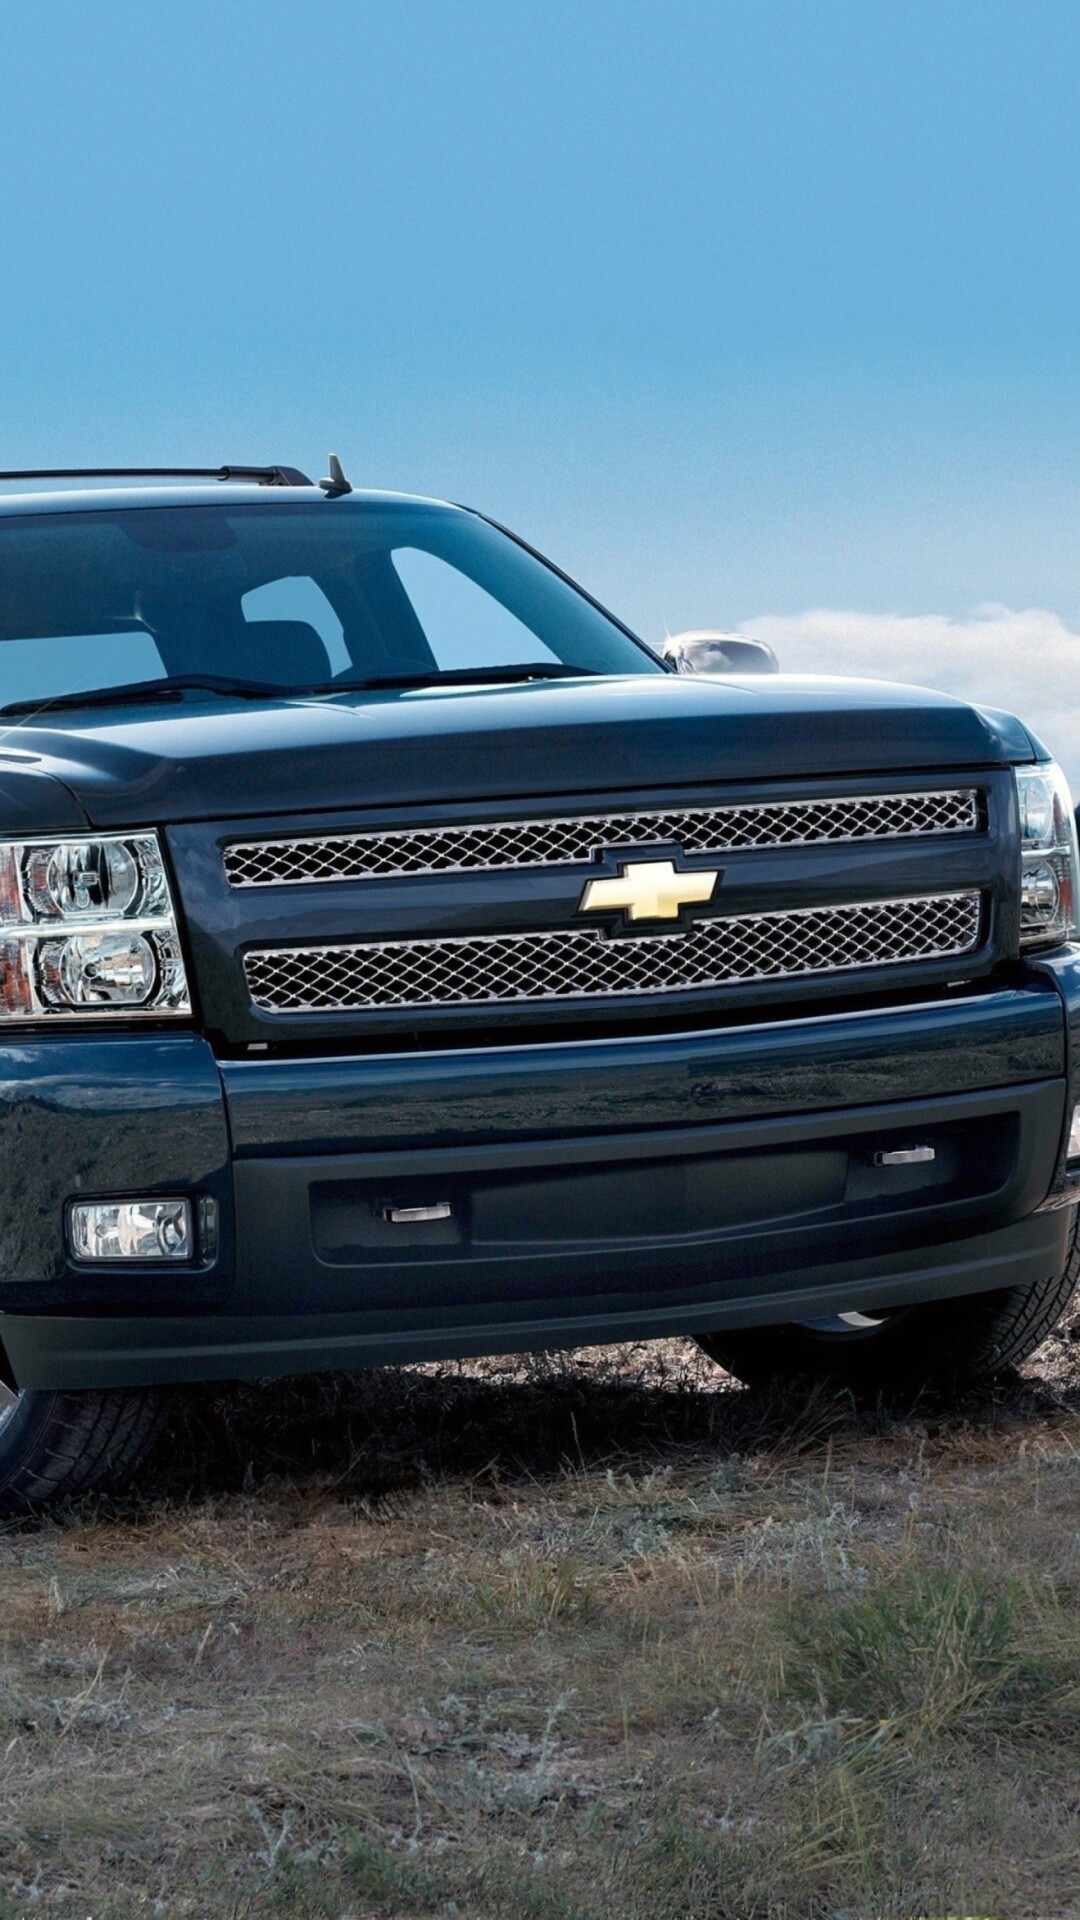 Chevrolet Silverado: Full-size pickups, The Chevy, Entered its fourth generation in 2019. 1080x1920 Full HD Background.